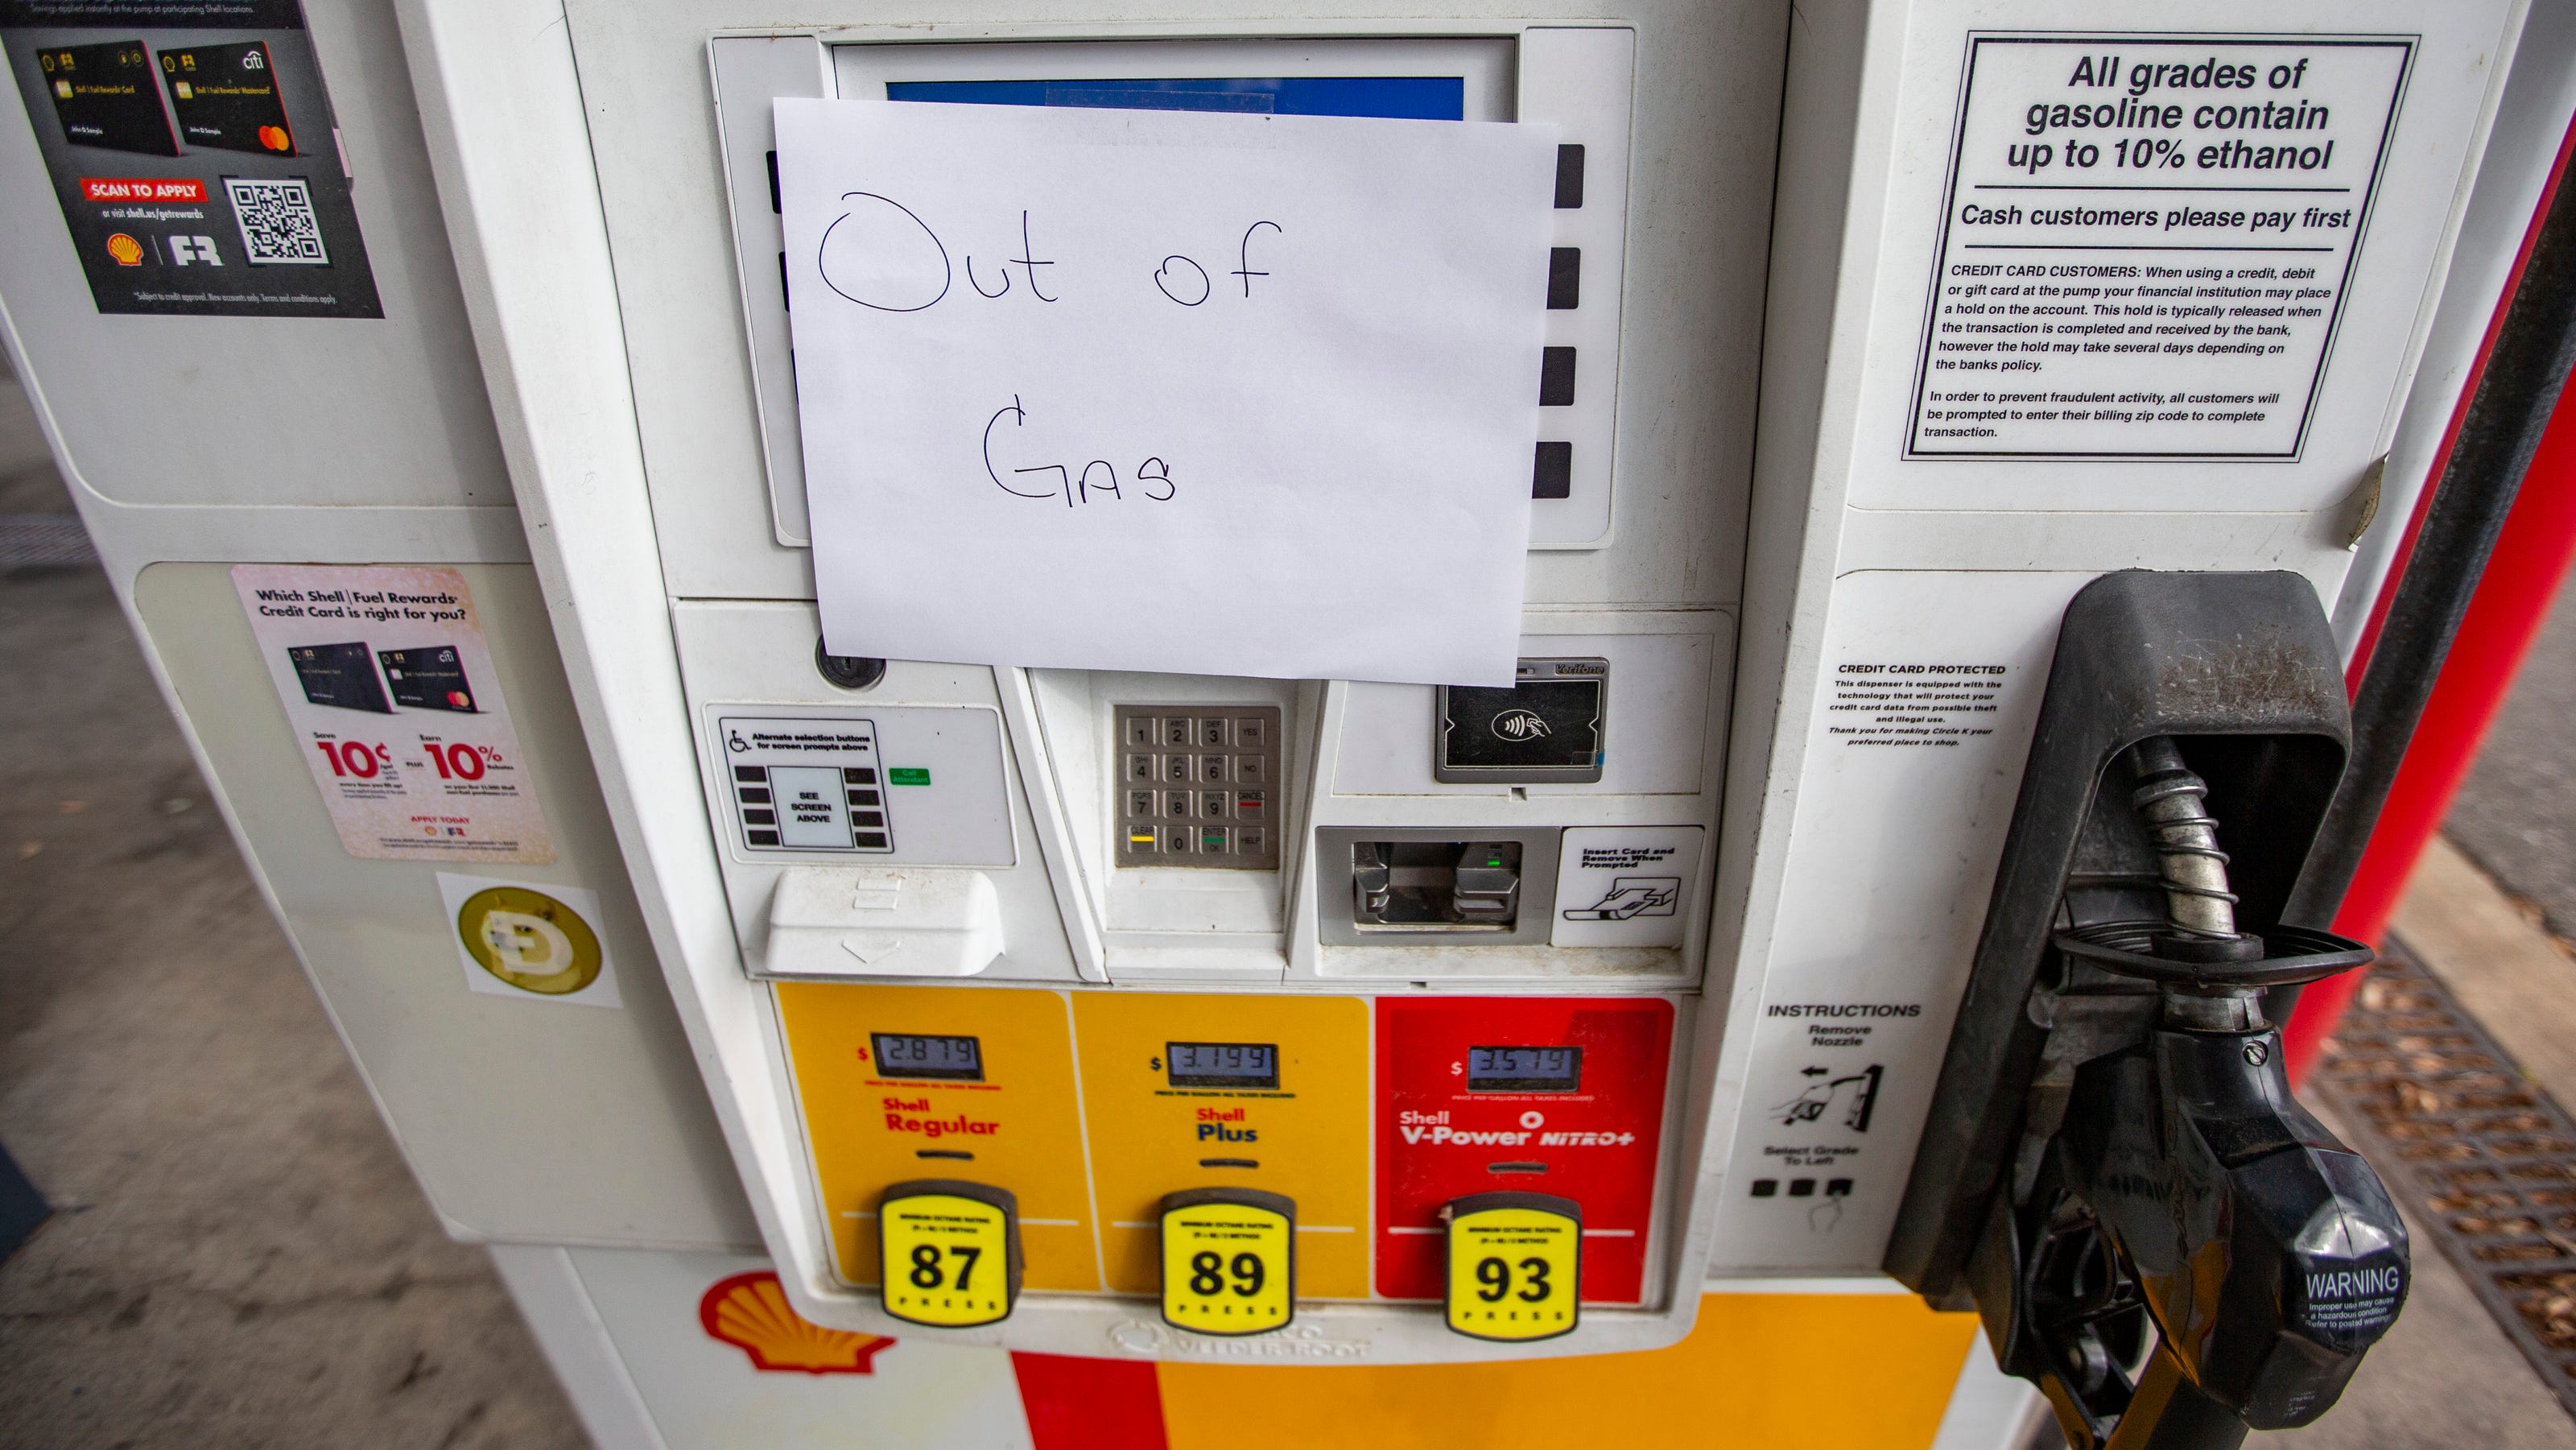 Federal government reacts to Florida gas shortages, DeSantis accusation